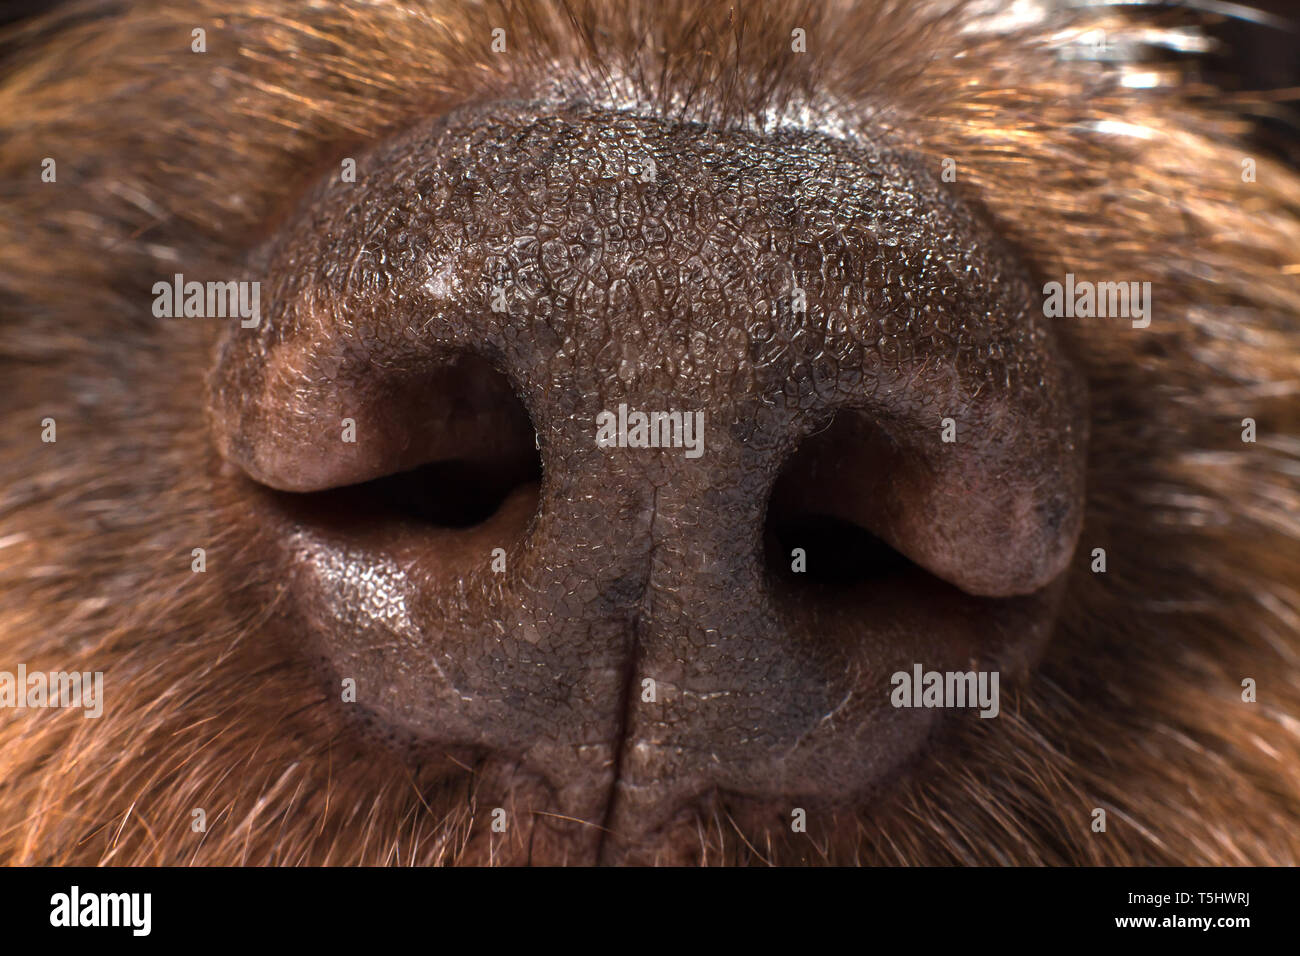 big brown nose of a hunting dog, close-up Stock Photo